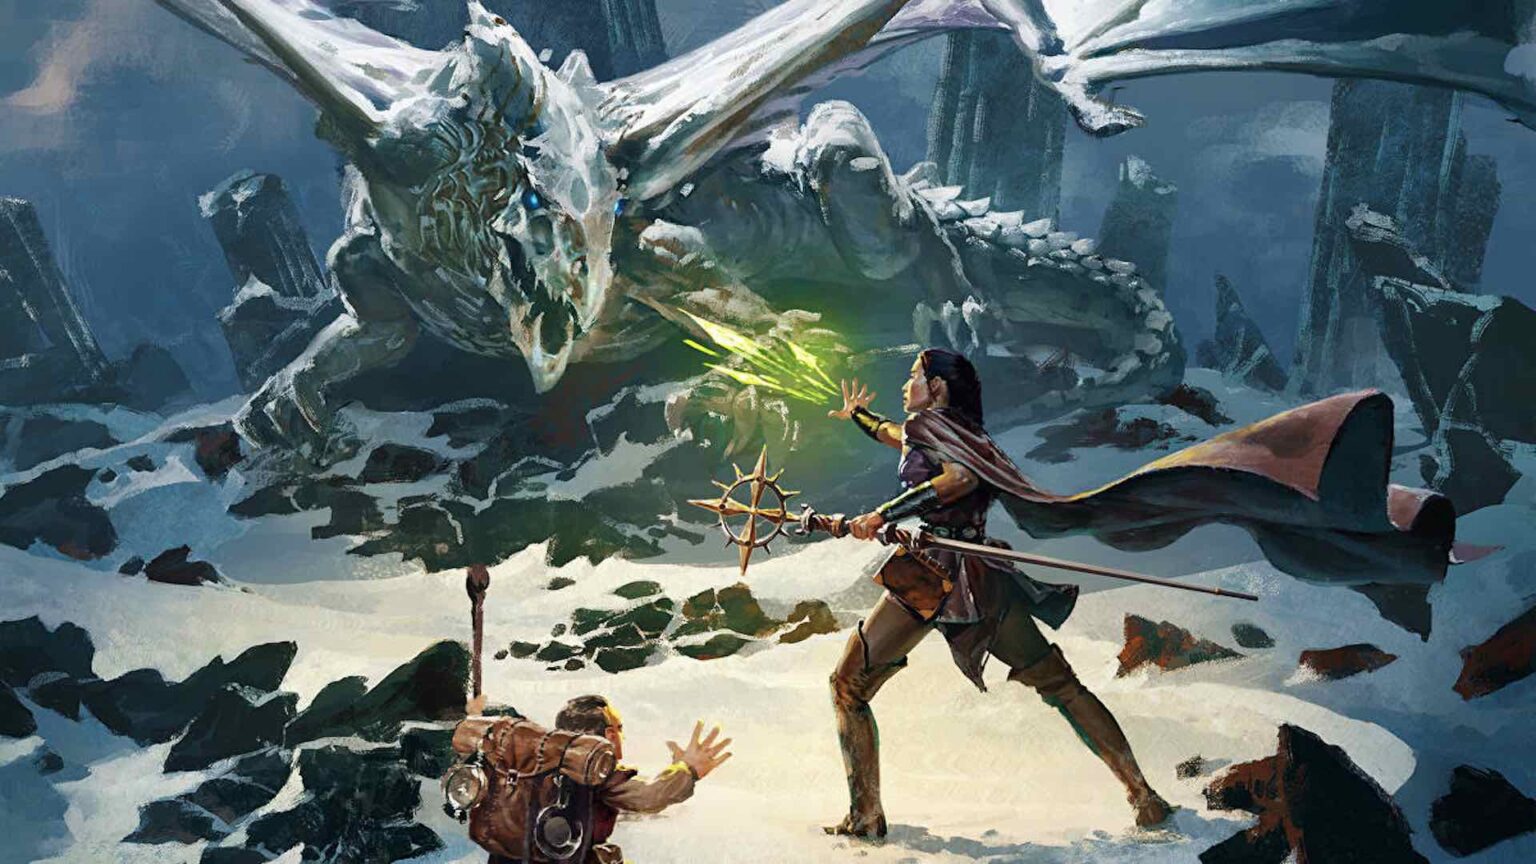 Tabletop game Dungeons & Dragons revolutionized the fantasy genre. Here's everything to know about the D&D TV series to come.